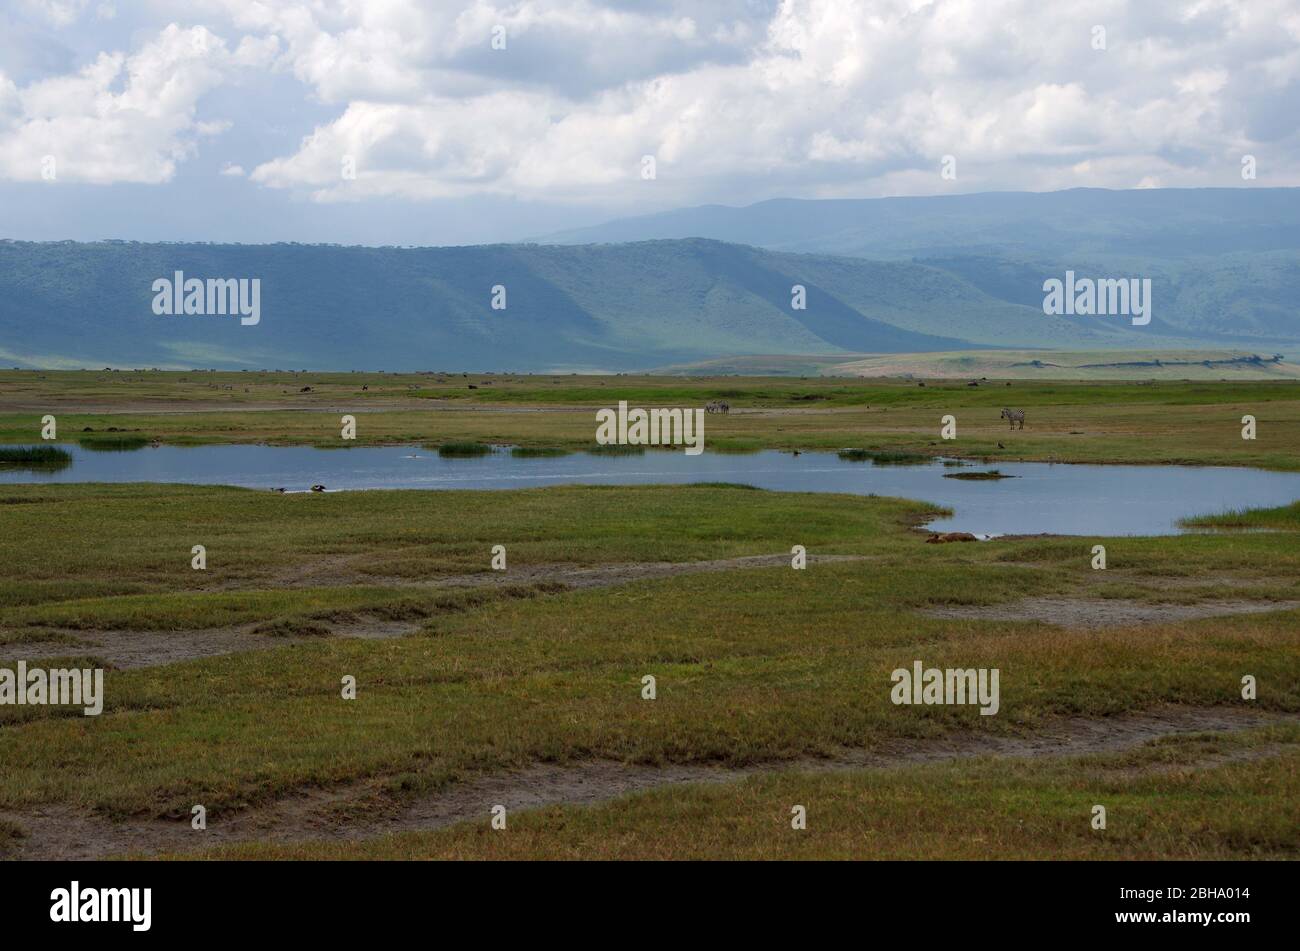 Landscape in the Ngorongoro crater in Tanzania, East Africa Stock Photo